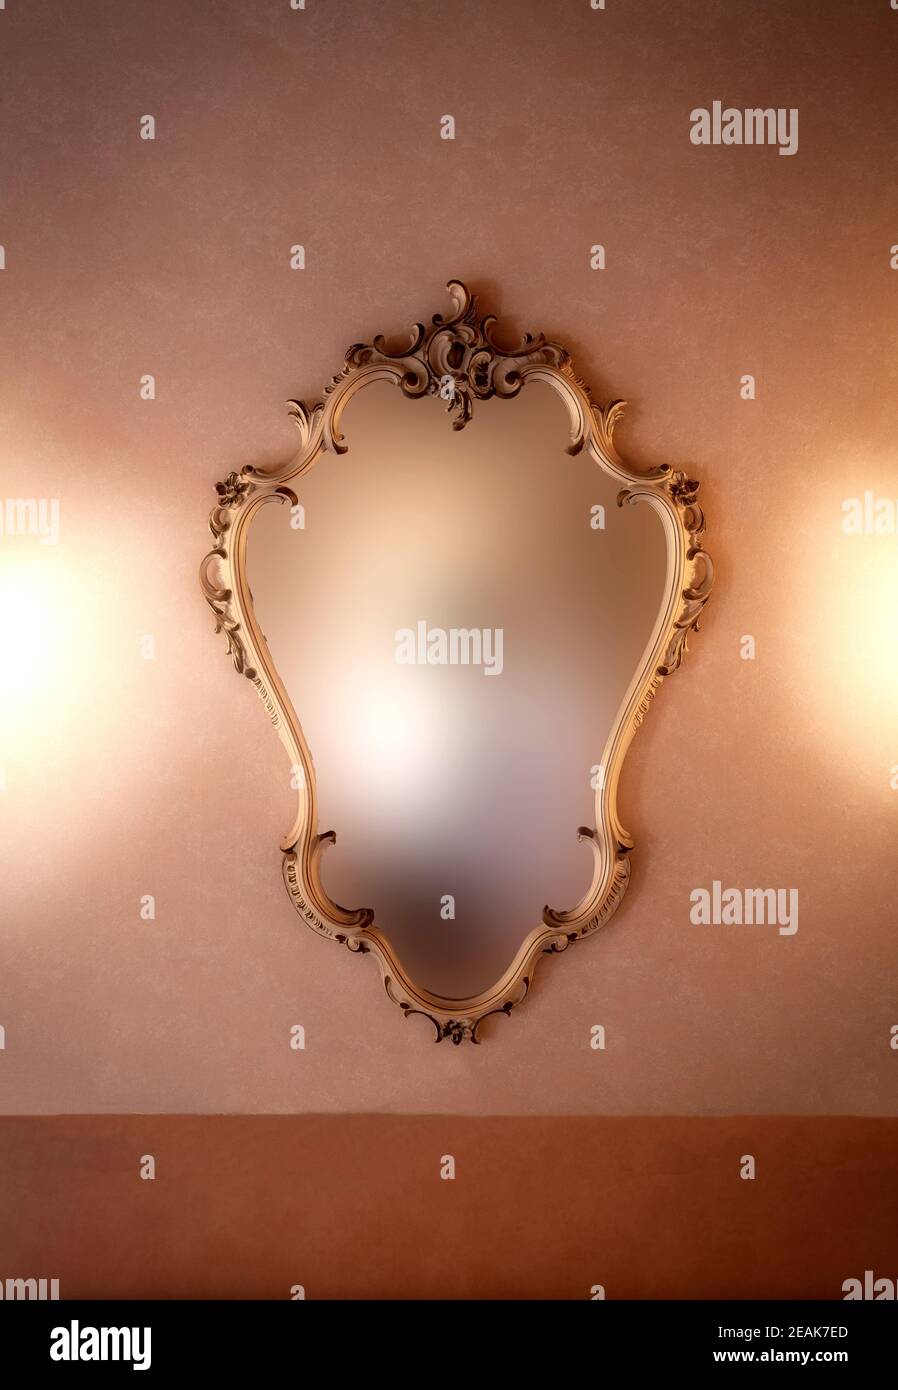 Old fashioned luxury gold colored frame mirror antique design, hanging on vintage wall background texture, blurred mirror, copy space Stock Photo